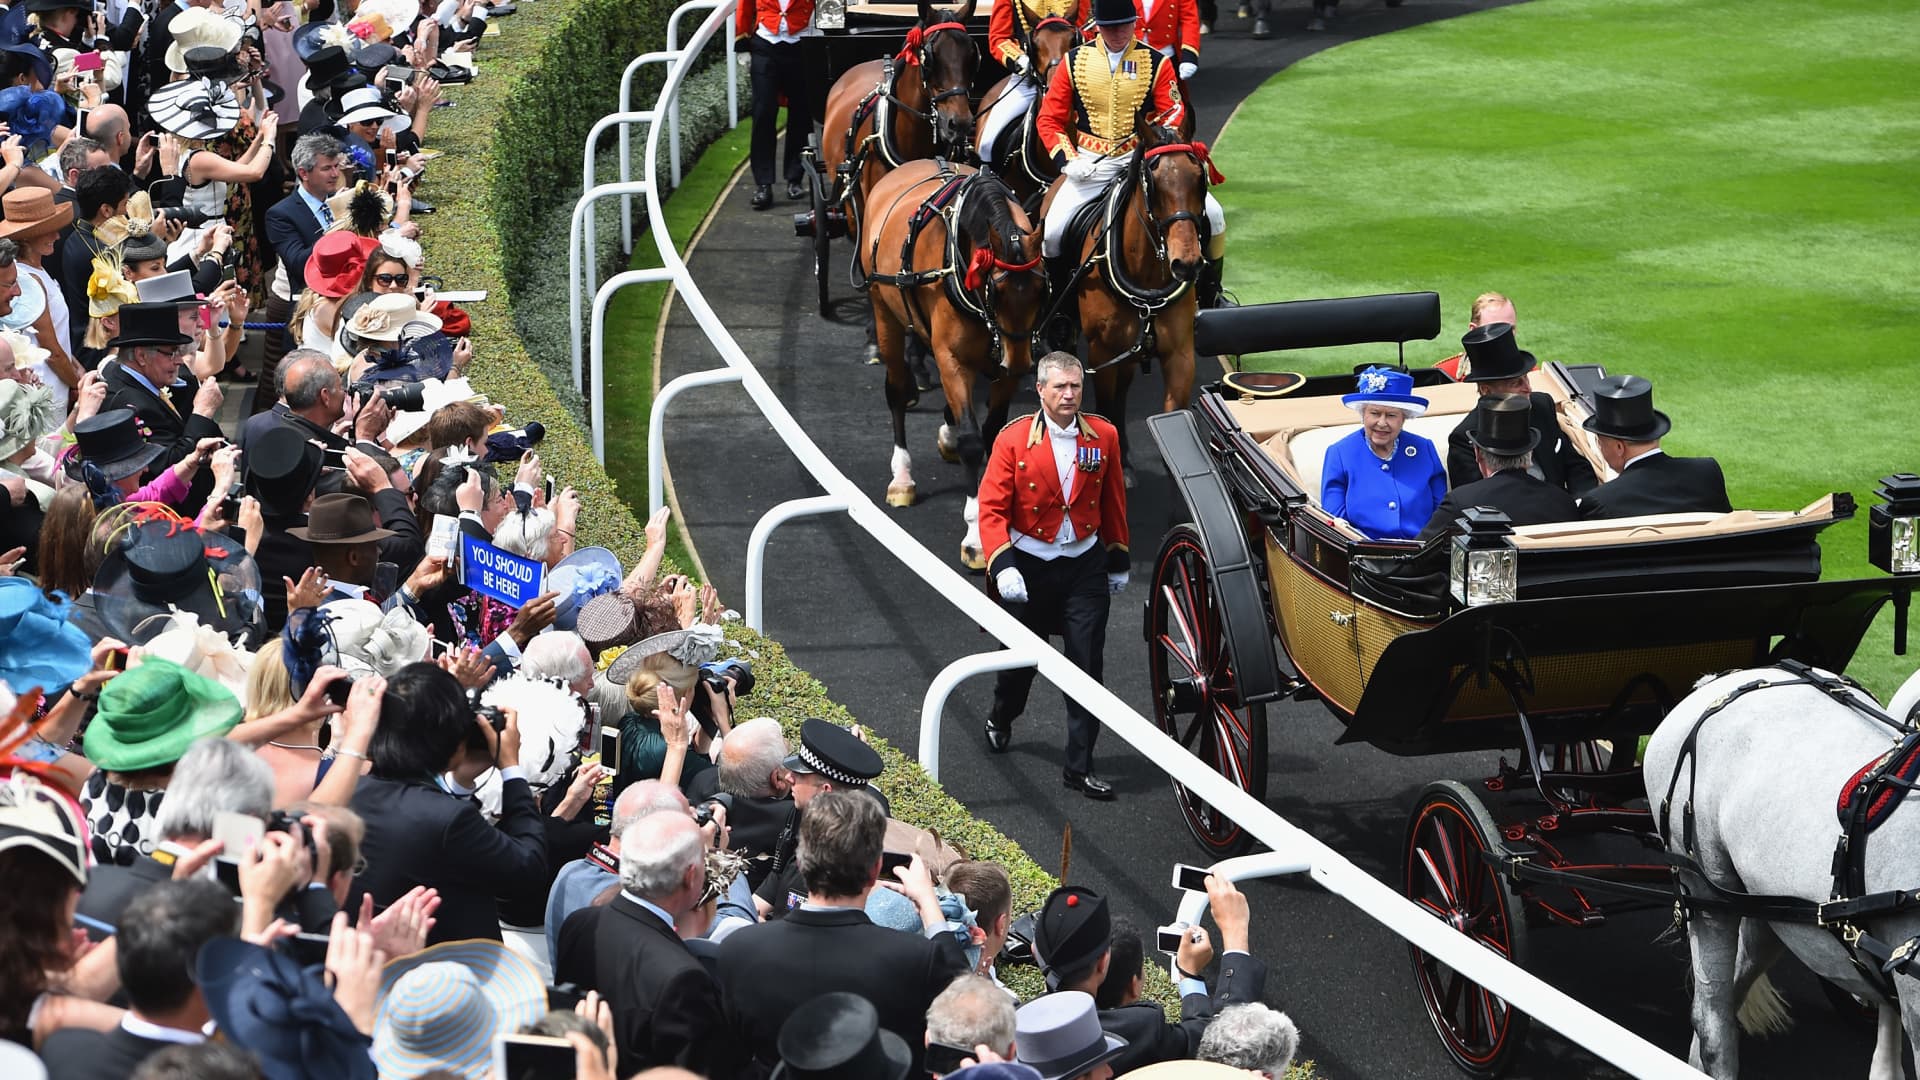 Queen Elizabeth and Prince Philip arrive for Day Two at the Royal Ascot Racecourse on June 17, 2015